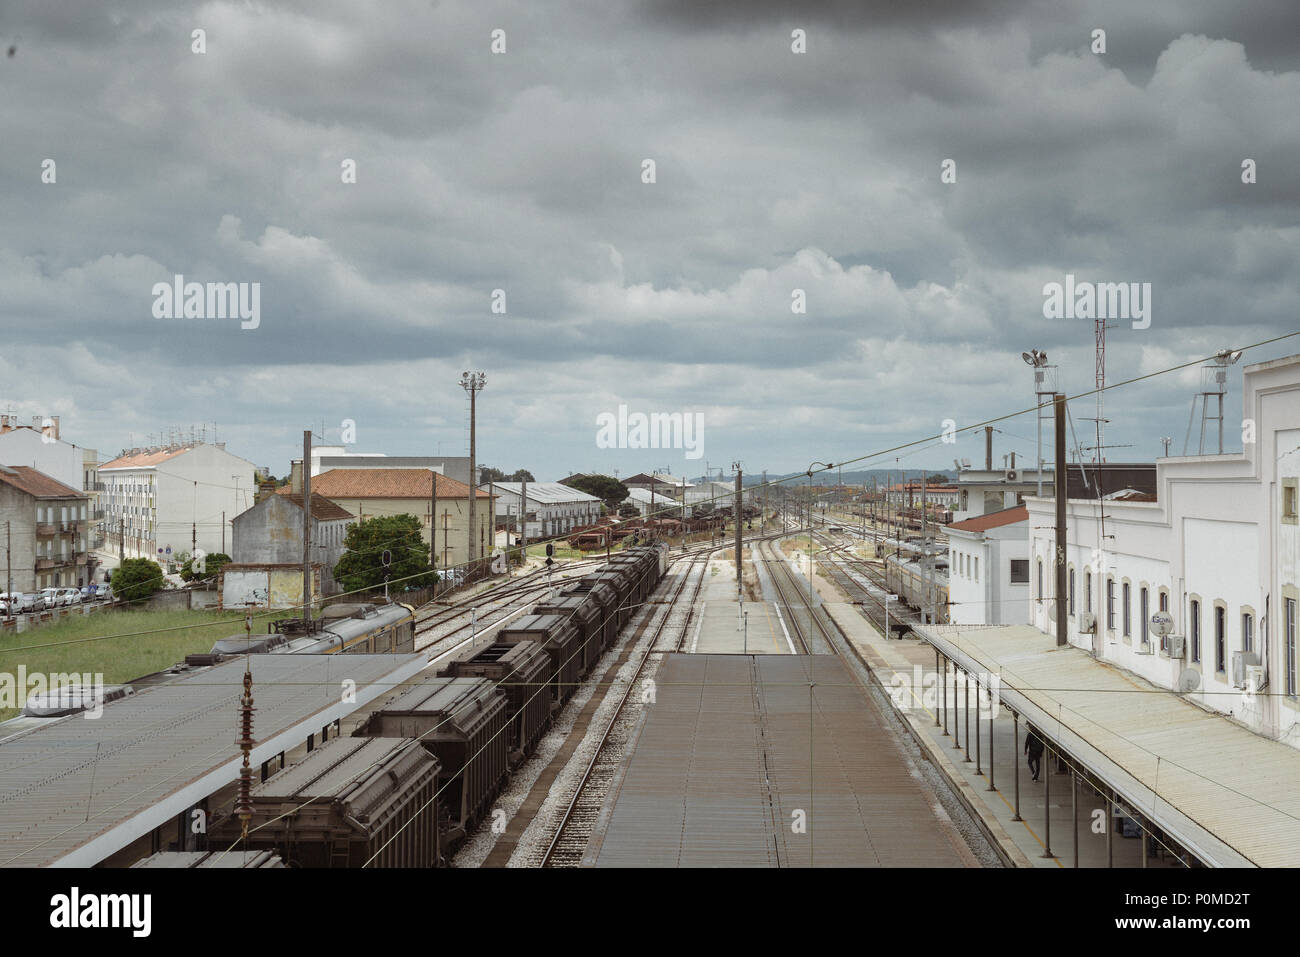 Entroncamento railroad junction in the Santarem district of Portugal. Entroncamento literally means junction in Portuguese Stock Photo